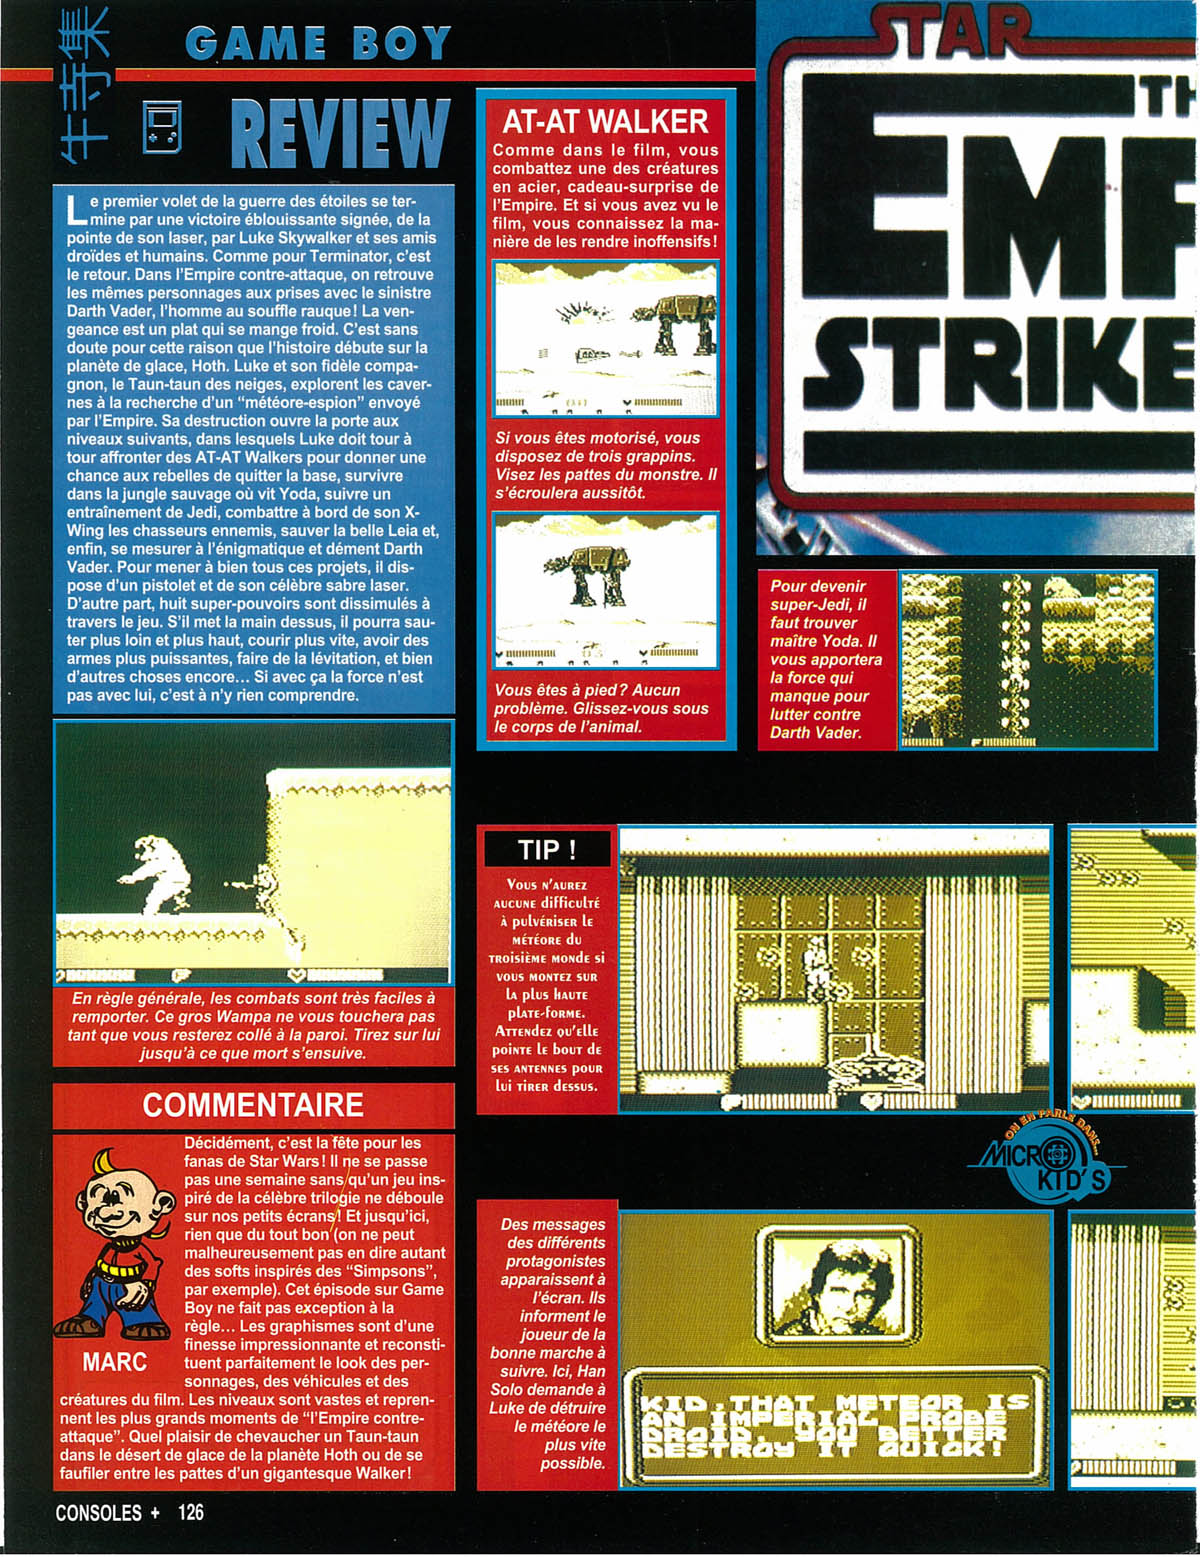 tests//1474/Consoles + 019 - Page 126 (avril 1993).jpg